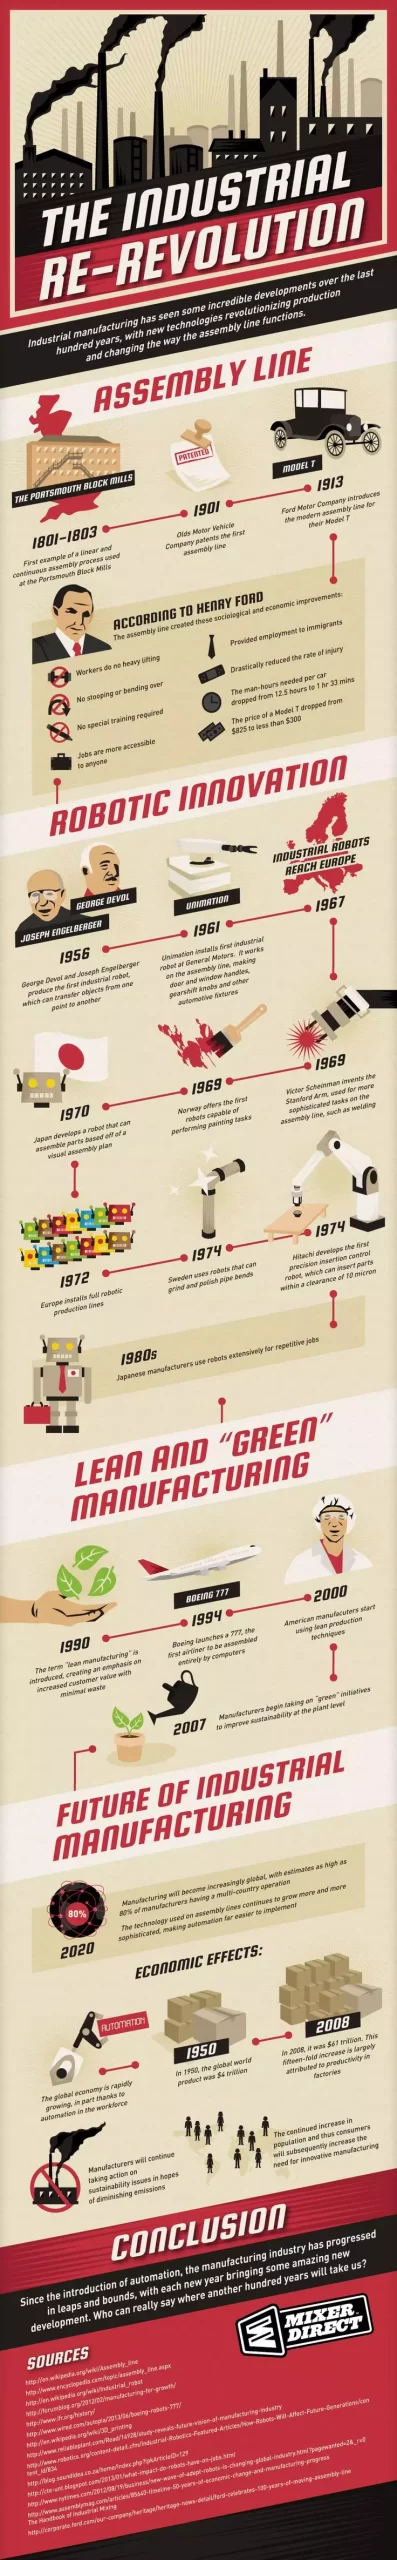 Industrial-Re-Revolution-Infographic-scaled.webp